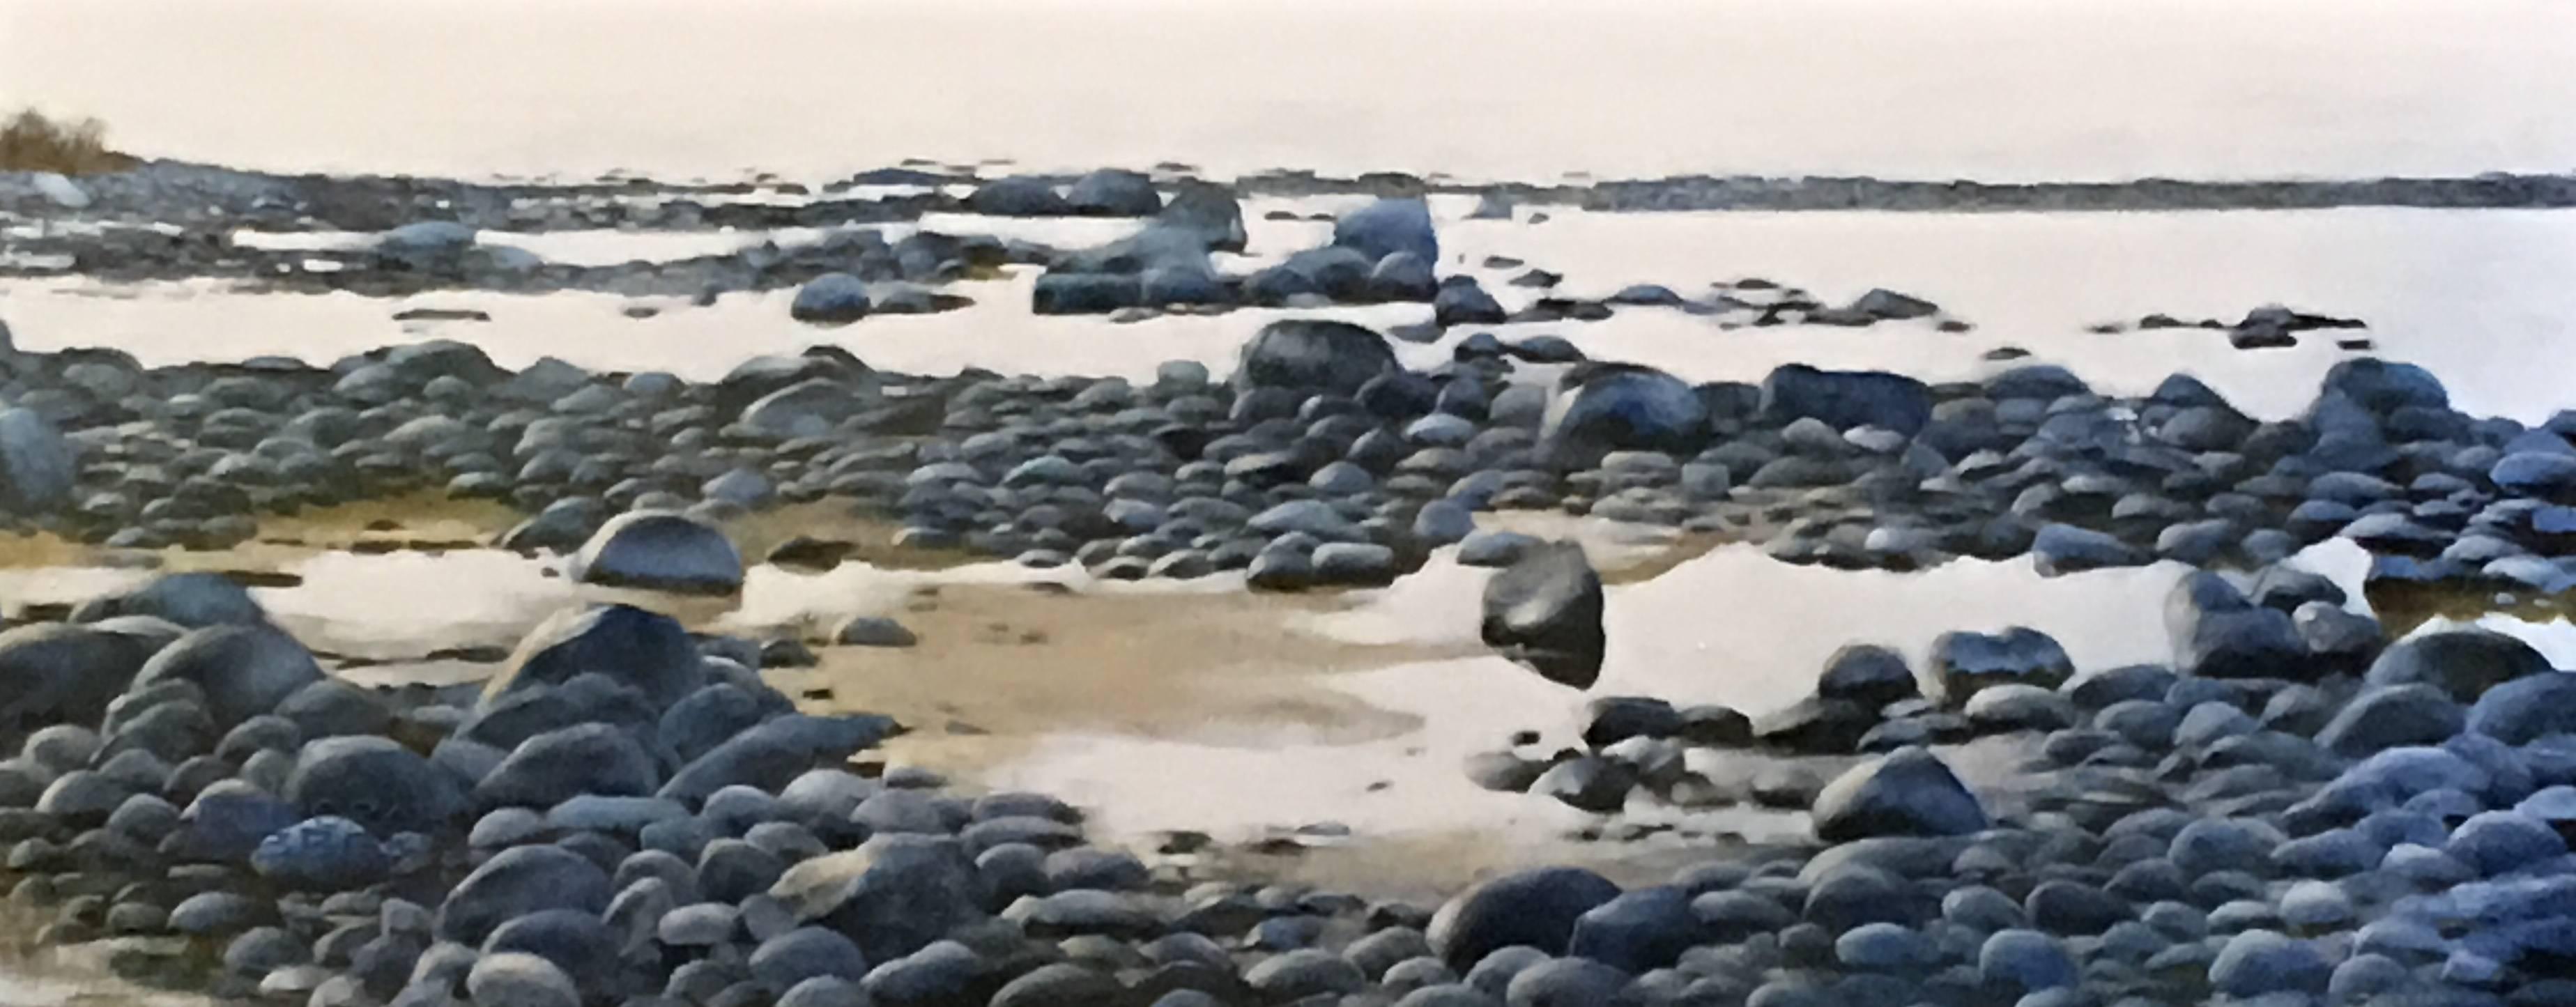 Deborah Ebbers Landscape Painting - Going Blue - Original Oil on Canvas Painting with Water and Stones at the Shore